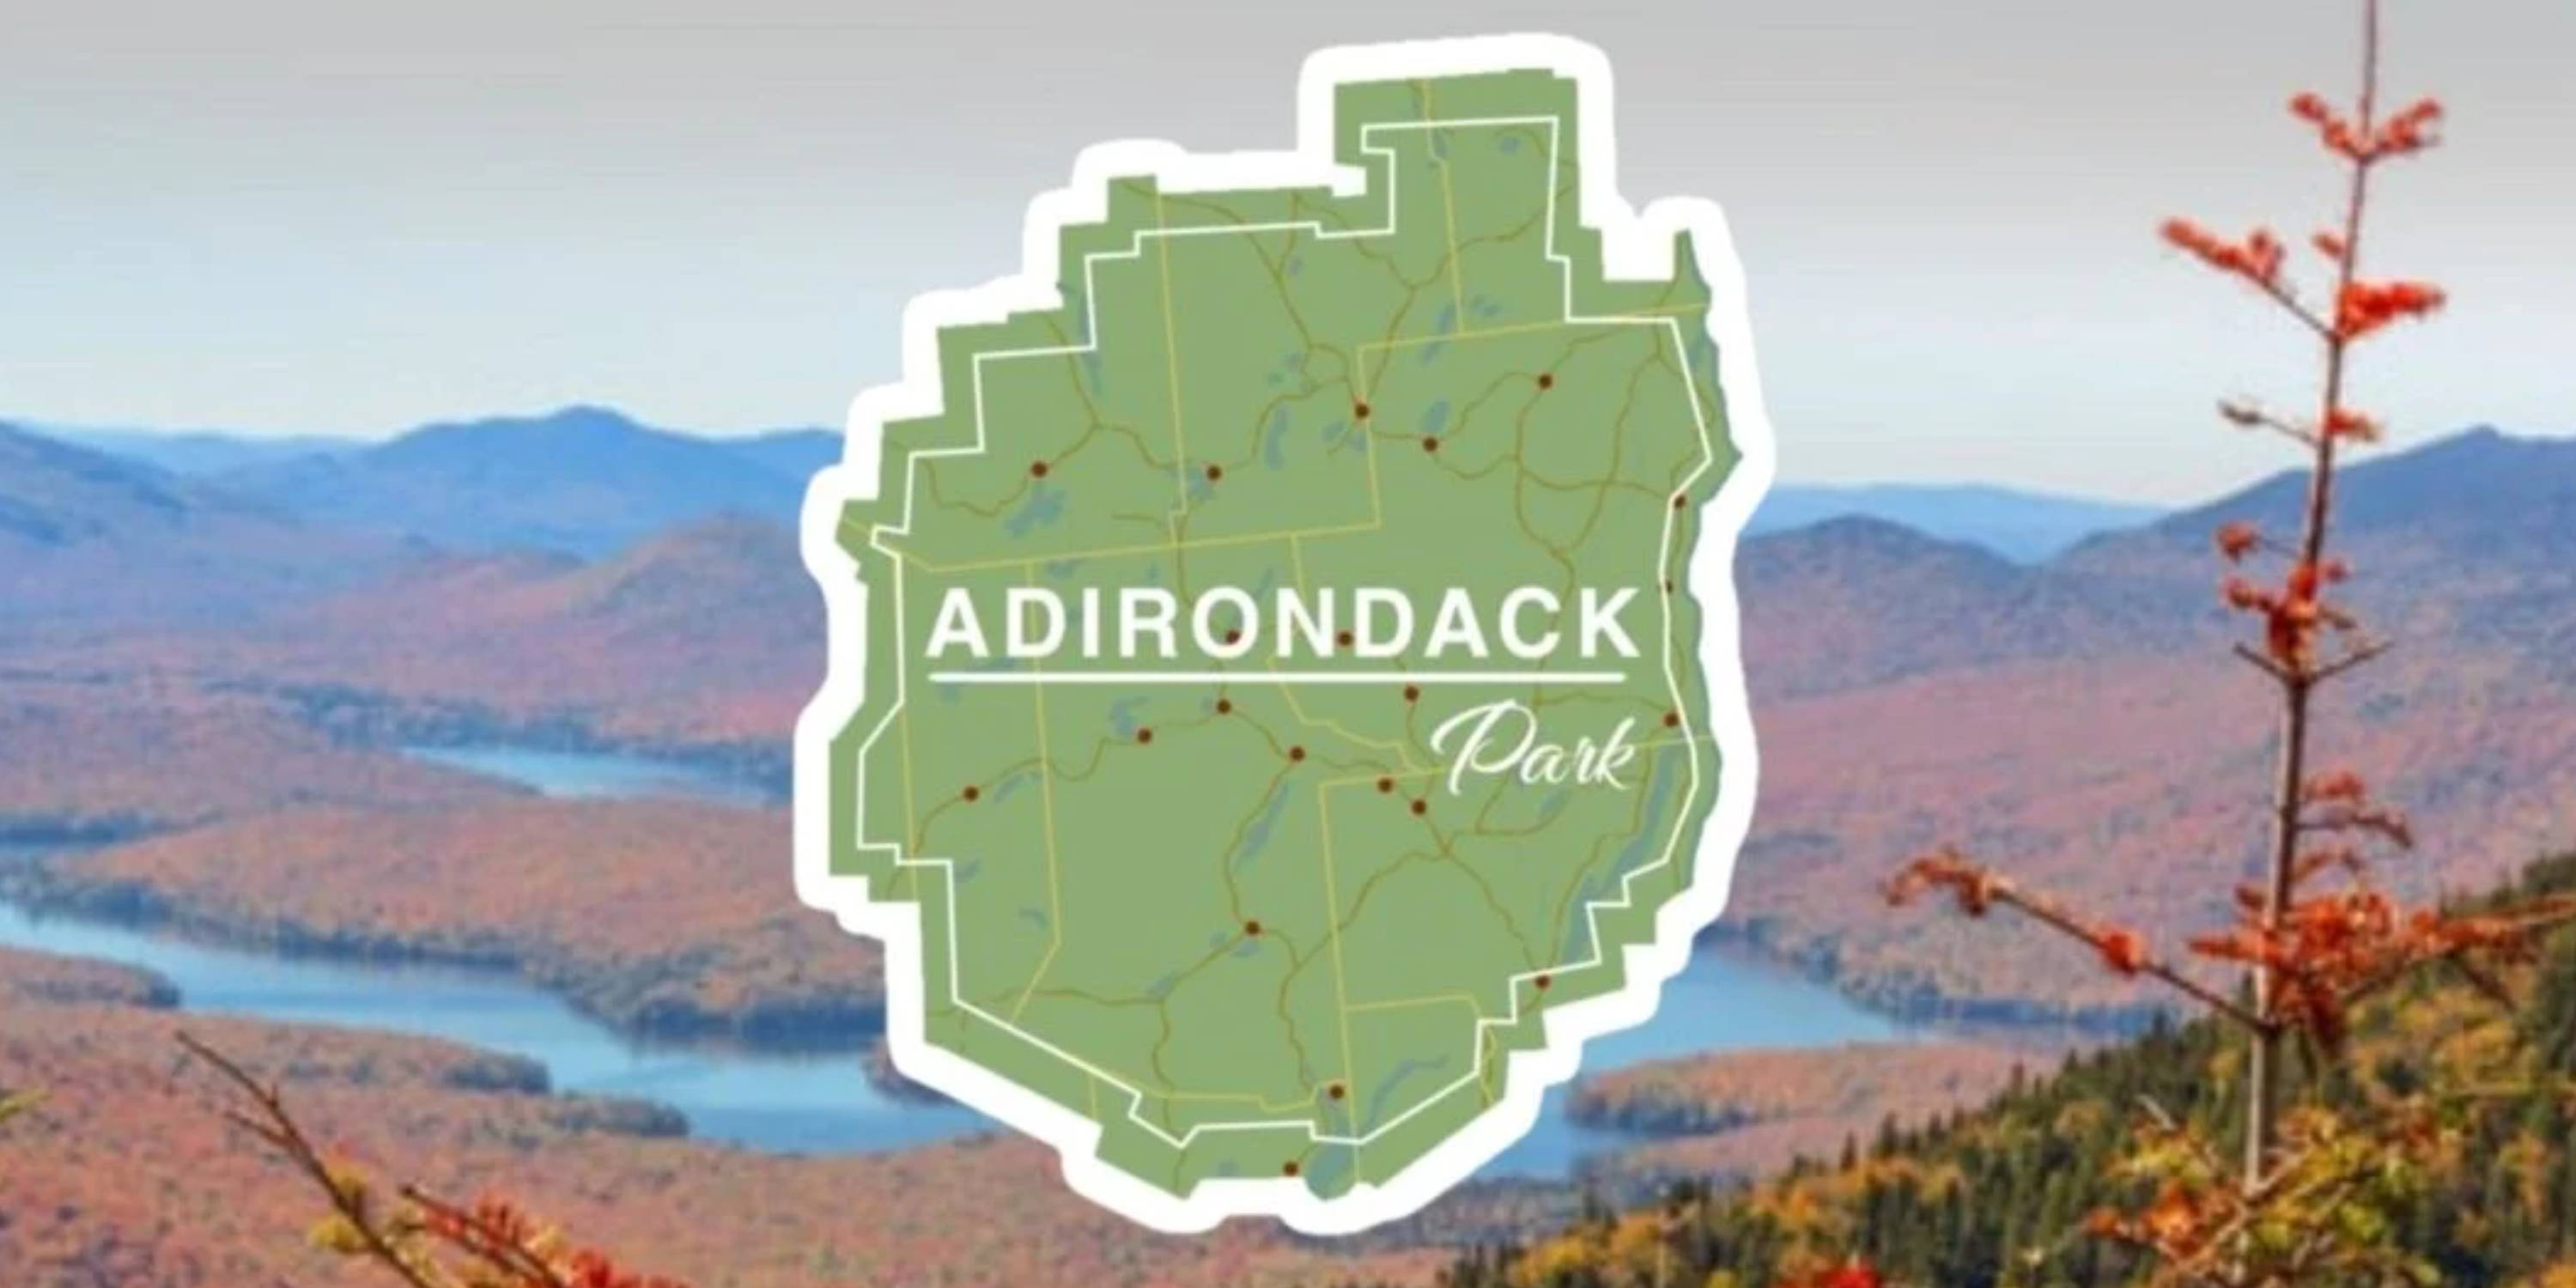 The adirondack Mountains with an overlay of the map of the Adirondack Park Blue Line